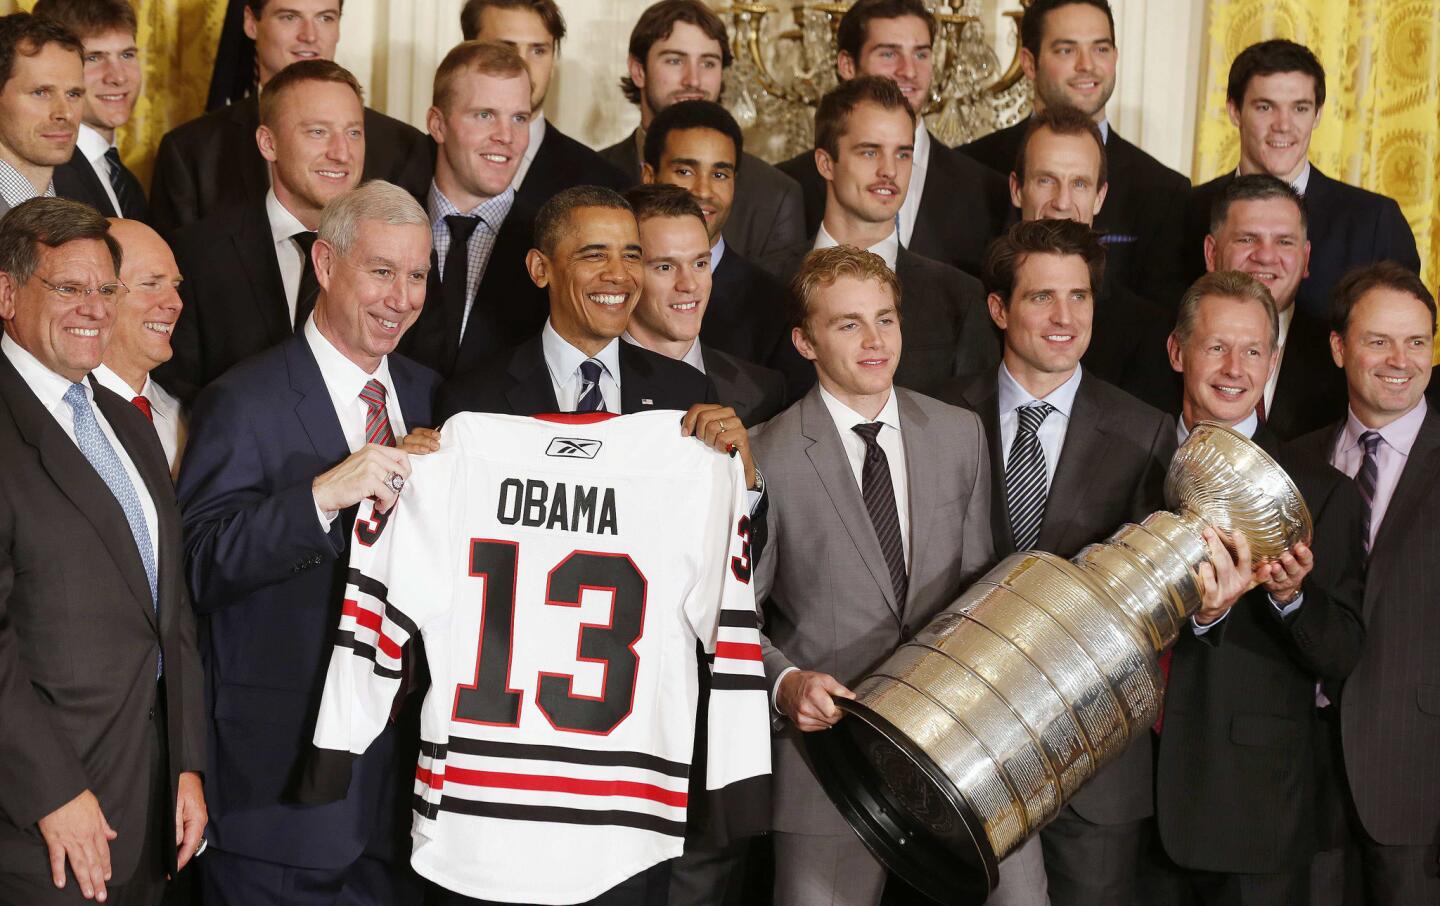 President Obama welcomes the 2013 Stanley Cup champions Chicago Blackhawks